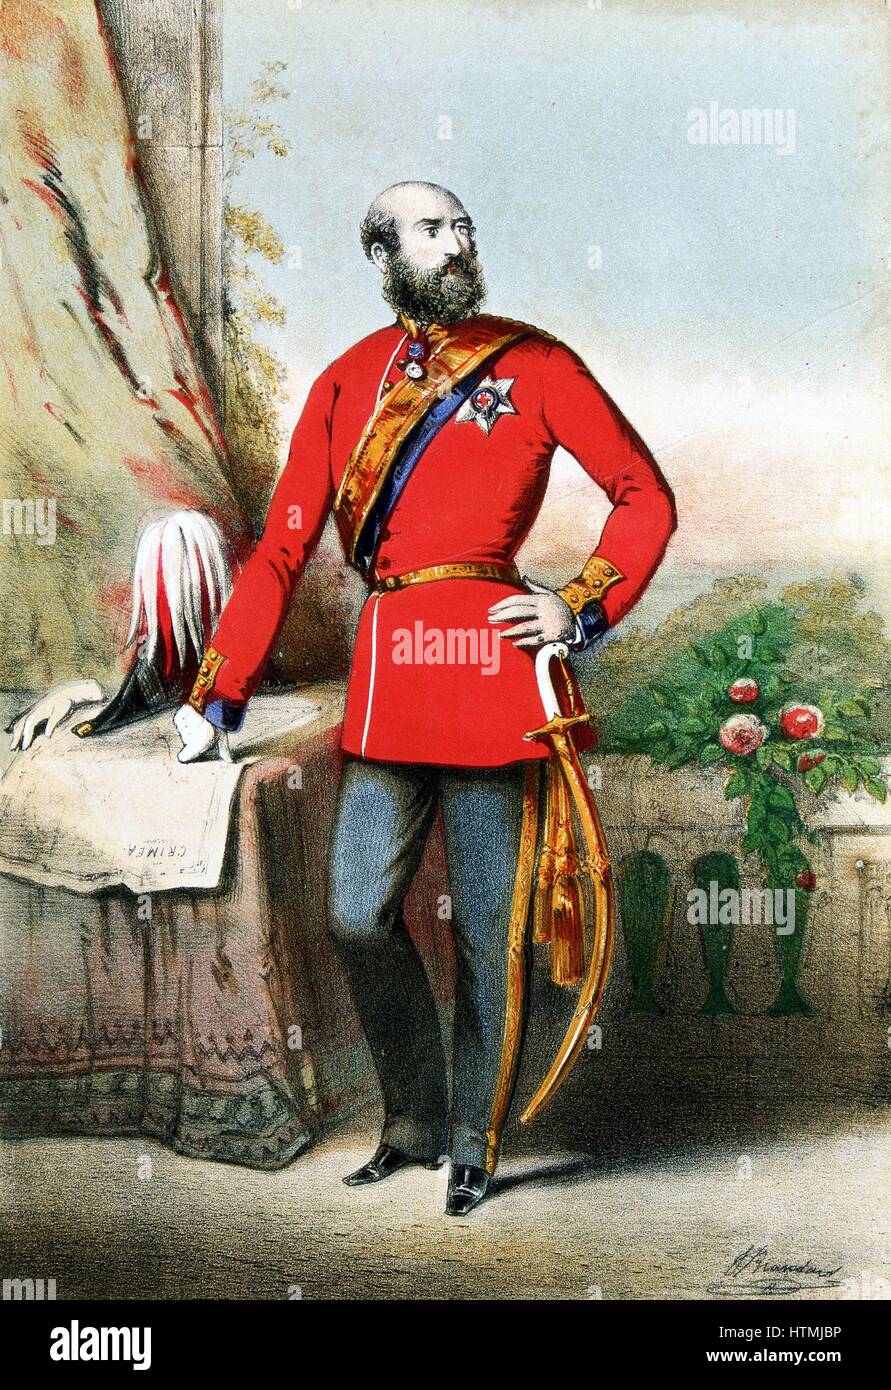 George William Frederick Charles, 2nd Duke of Cambridge, cousin of Queen Victoria. Commanded division in Crimea 1854. Field Marshal 1862, C-in-C British army. Lithograph from cover of music of 'The Soldier's Polka' showing his hand on map of Crimea. c1850 Stock Photo